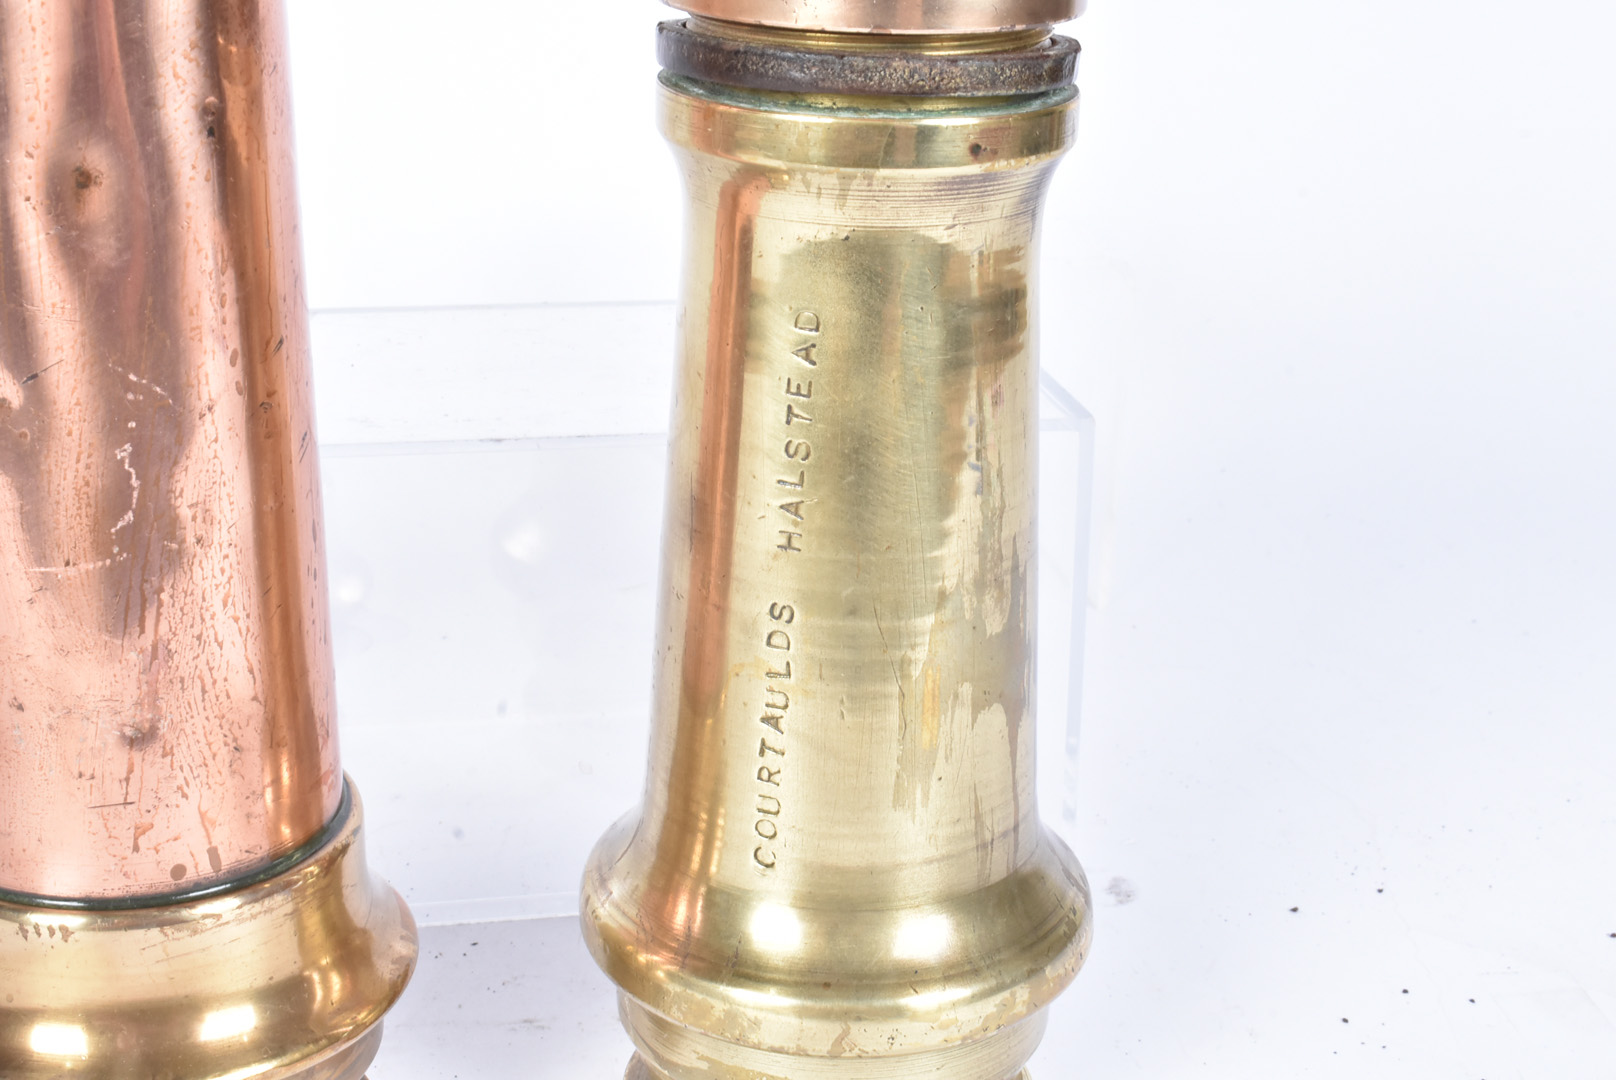 Two vintage fire hose nozzles, including a Courtaulds Halstead example Type A, British Standard Spec - Image 2 of 3